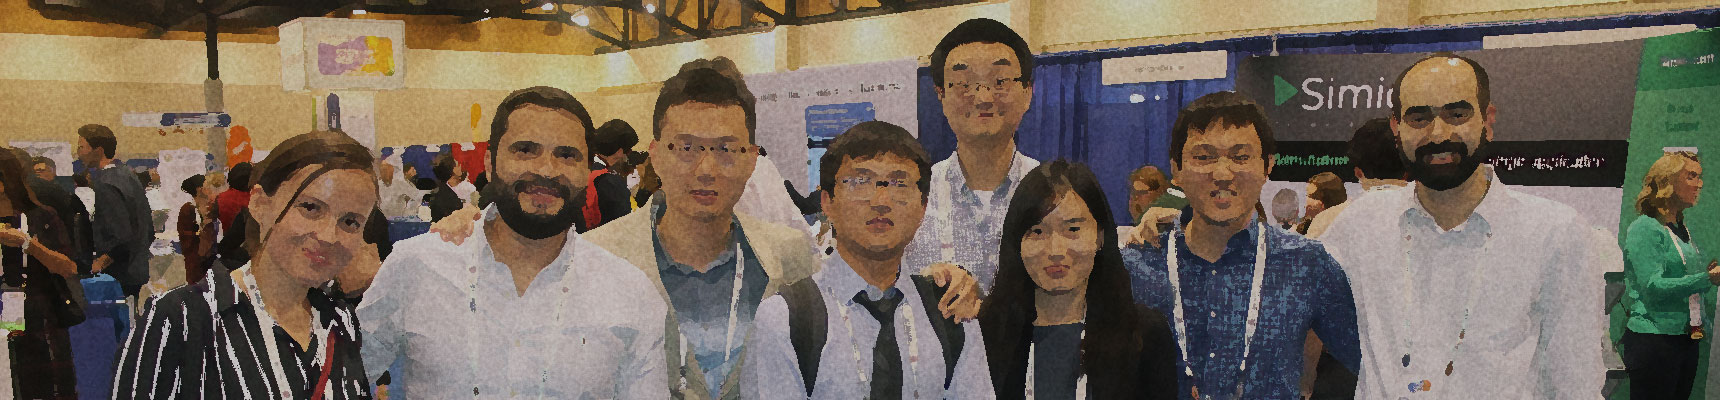 A group of eight male and female students standing together and smiling in an exhibition hall.